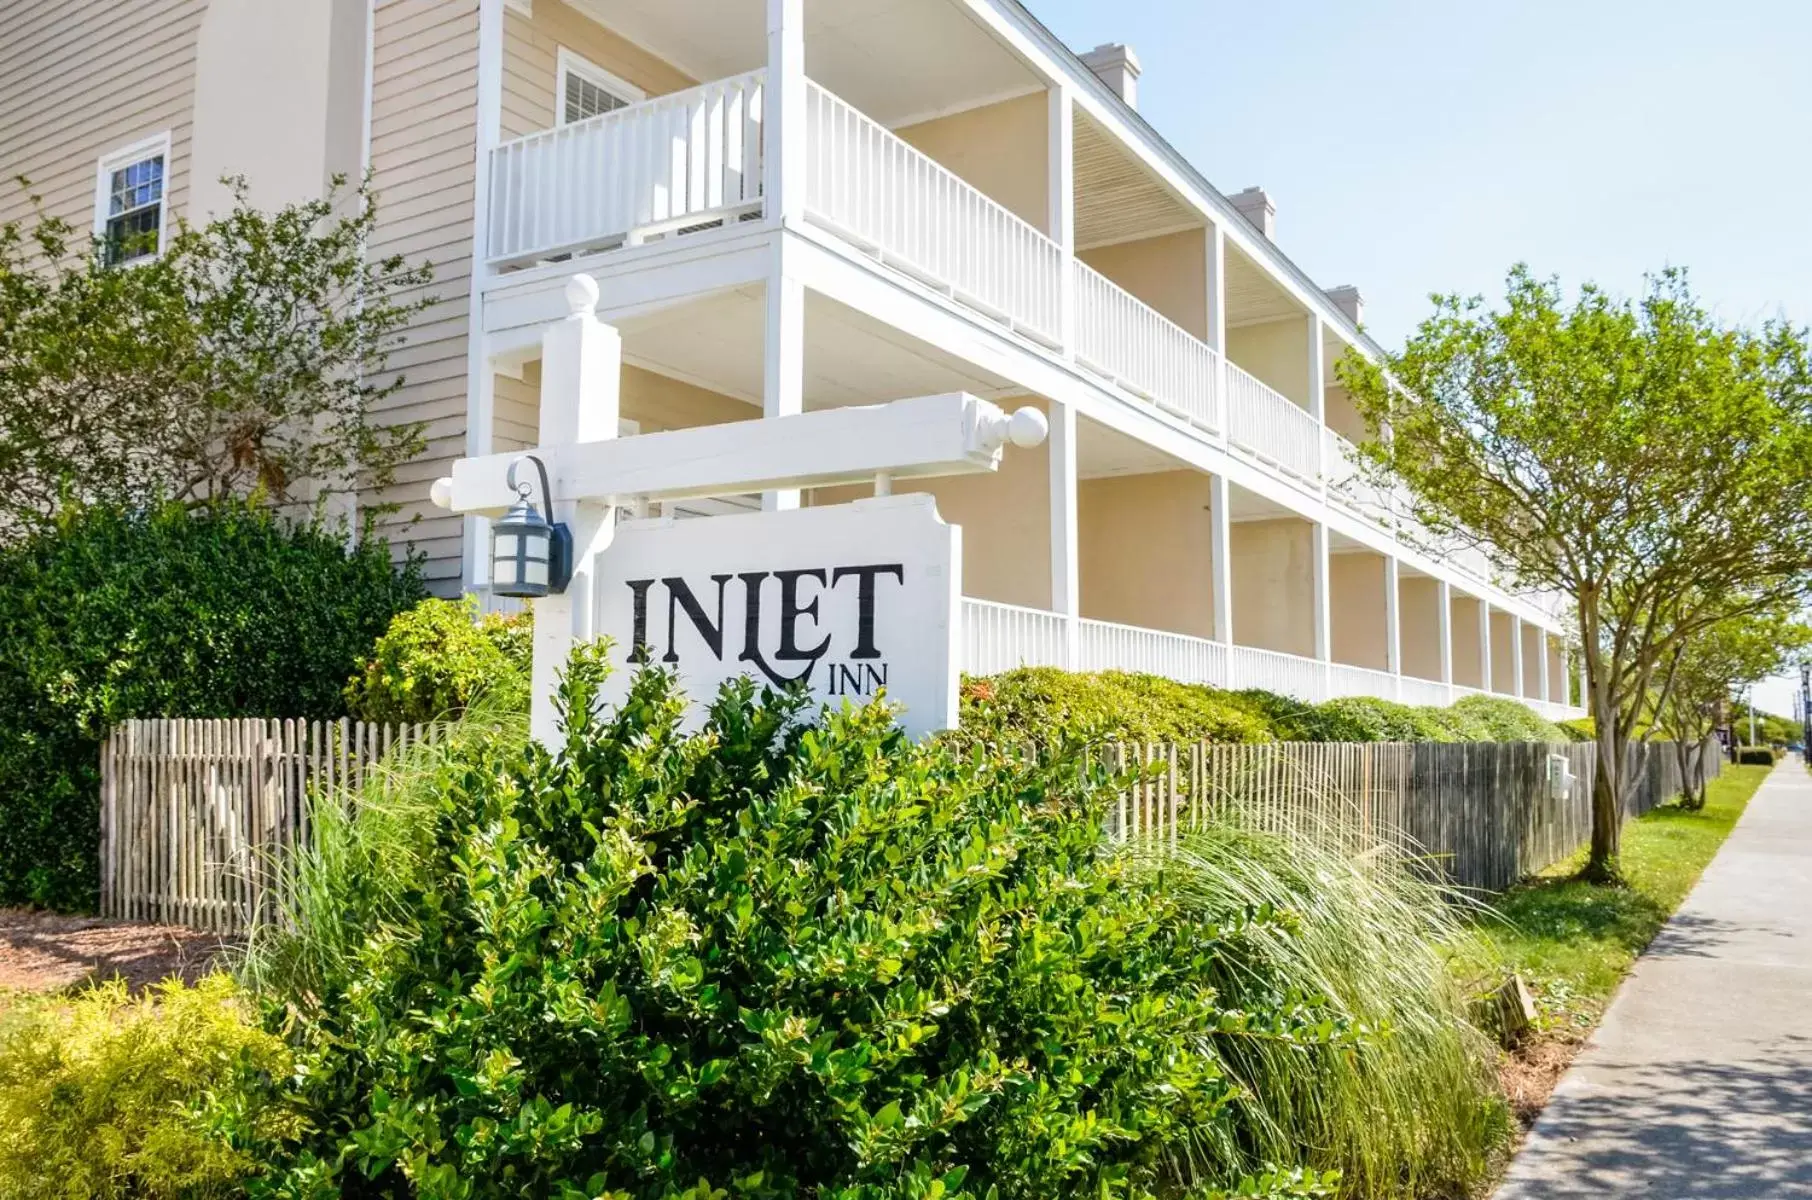 Property building in Inlet Inn NC